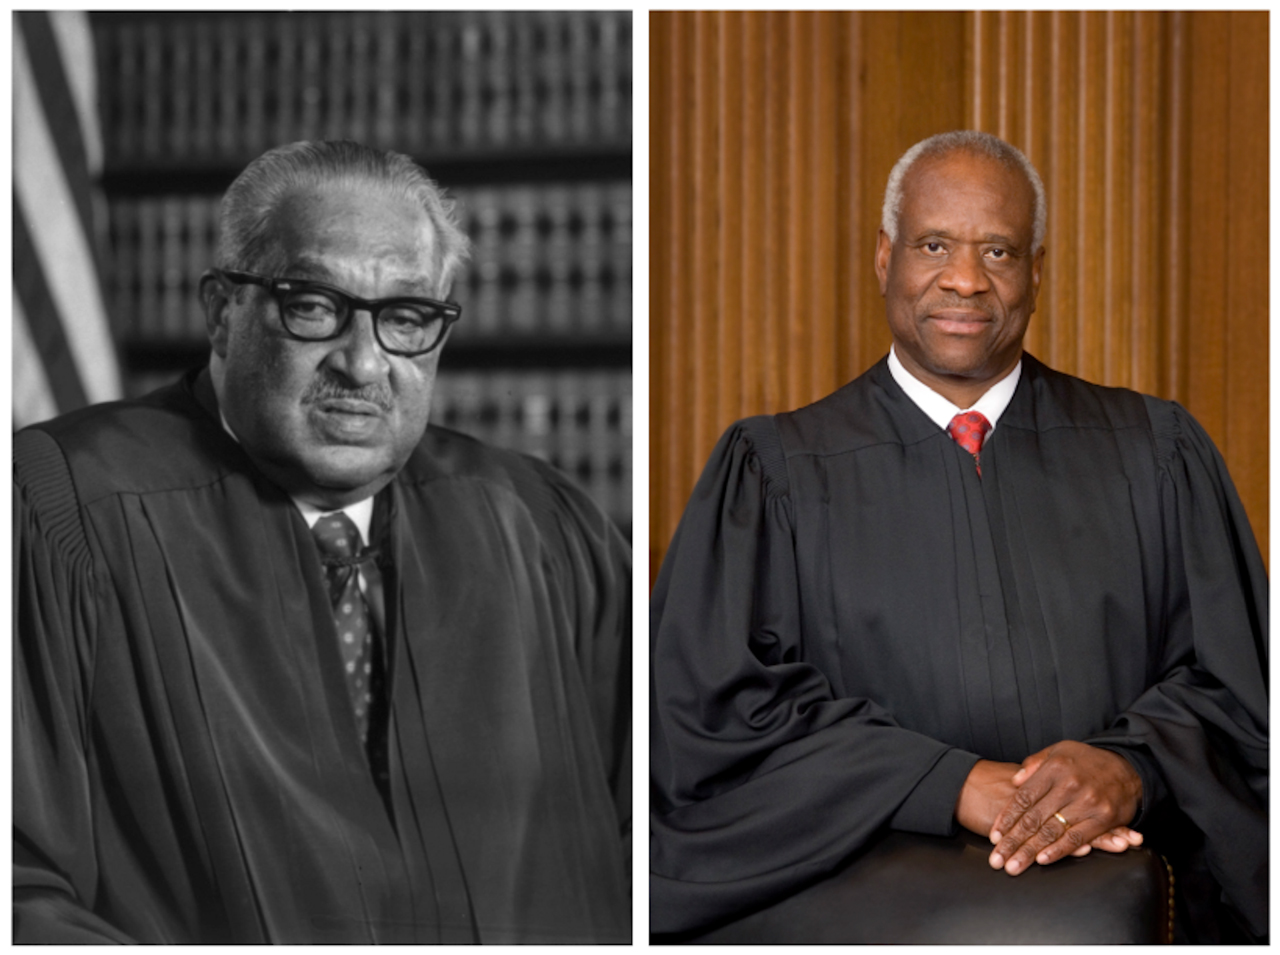 Thurgood Marshall, left, had a very different view of the purpose of the Supreme Court than his successor, Clarence Thomas. (Source: U.S. Supreme Court via Wikimedia Commons)